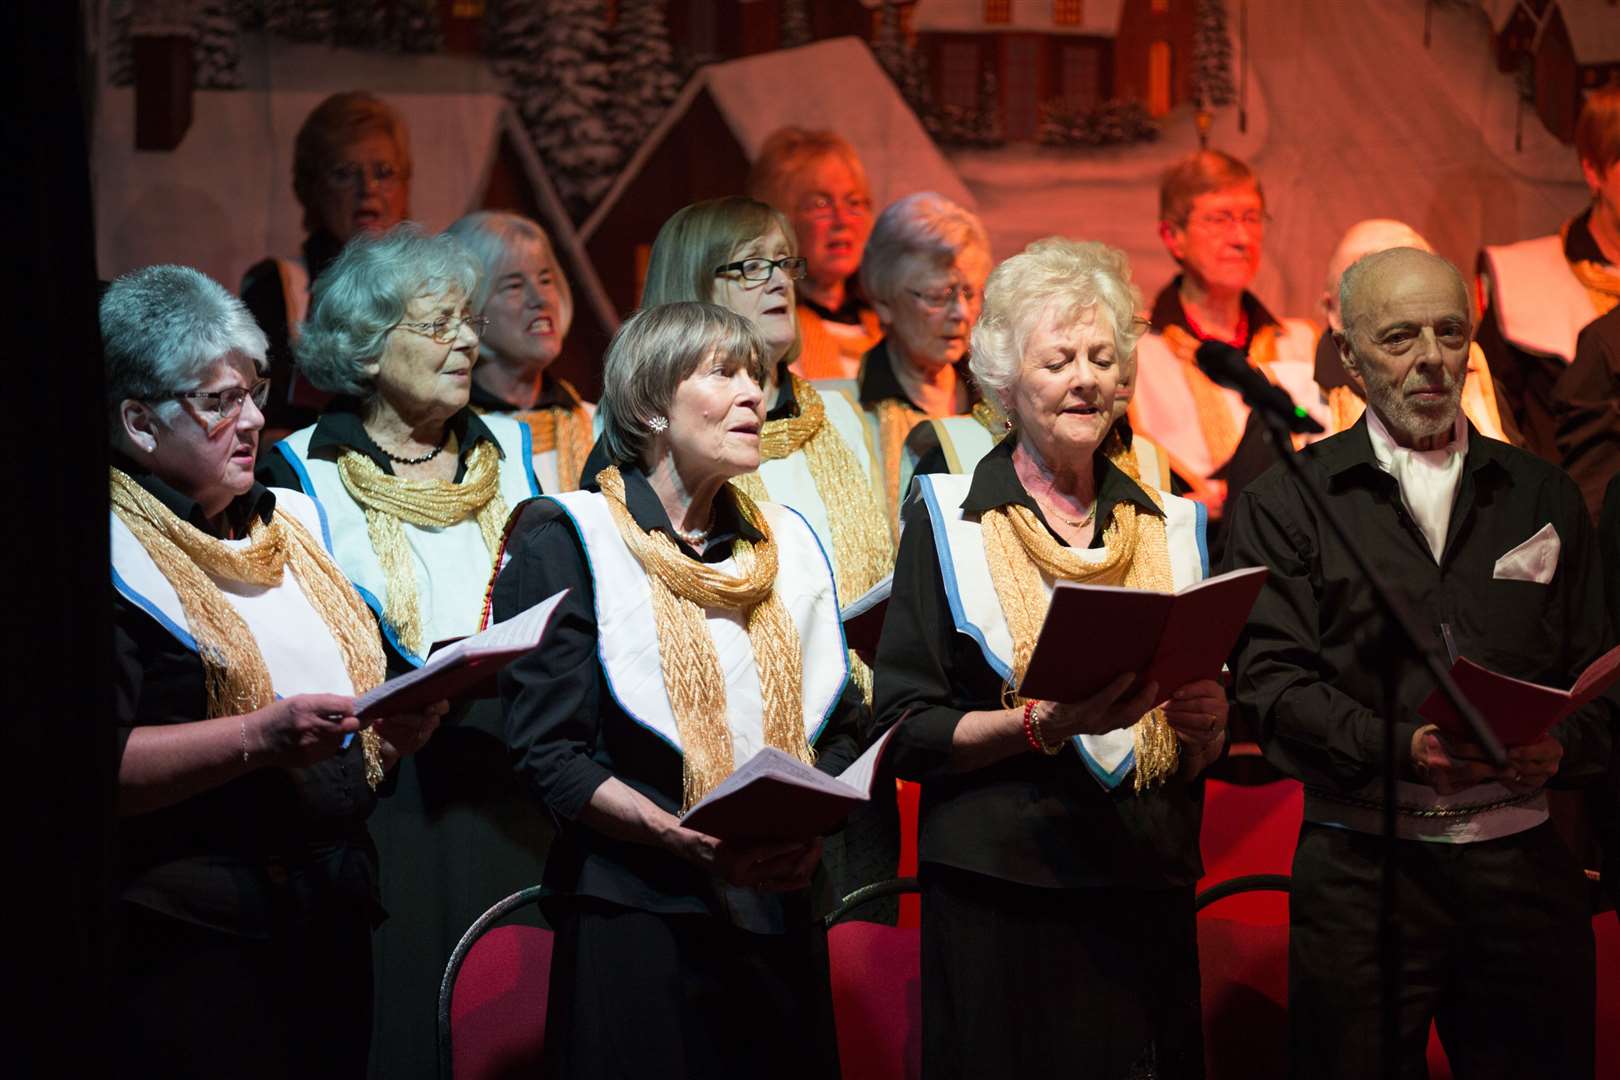 The Singing For Pleasure group meets regularly at Merkinch Community Centre.